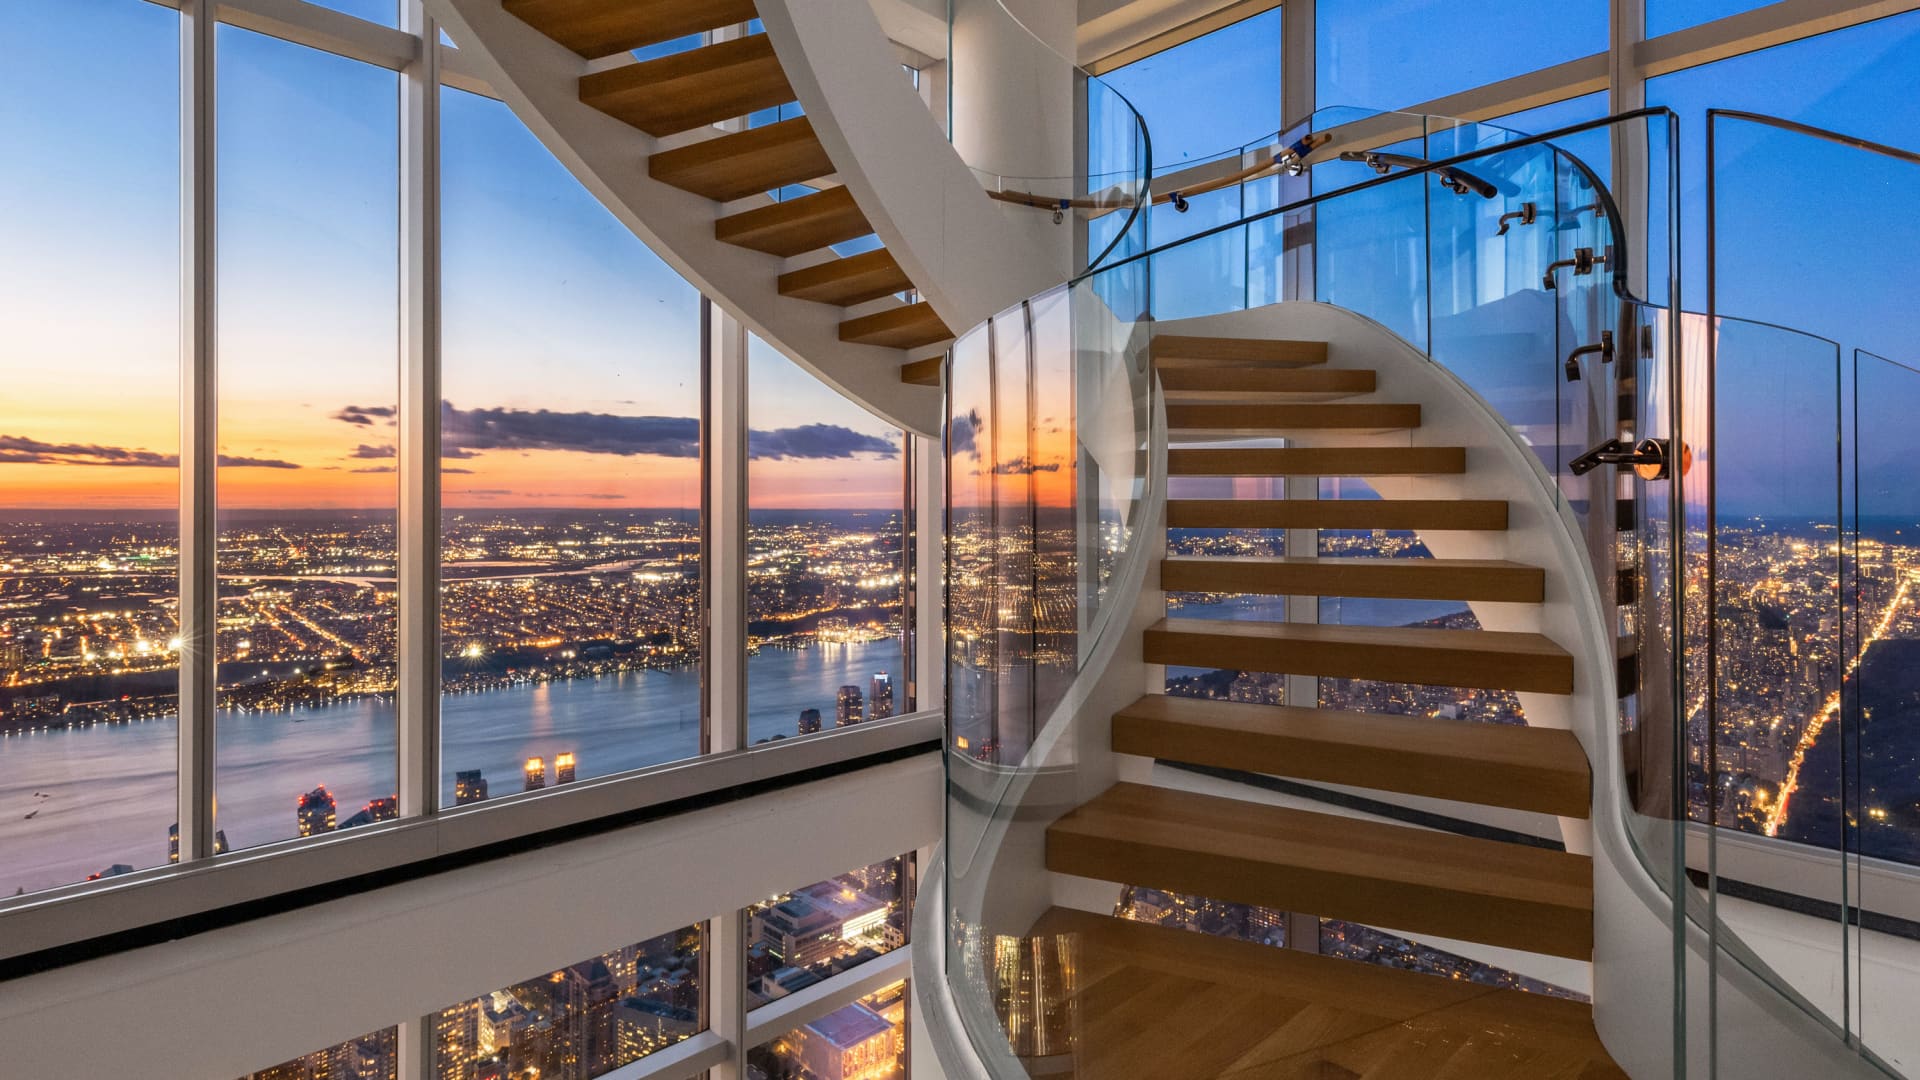 Contained in the 0 million penthouse on ‘Billionaires’ Row’